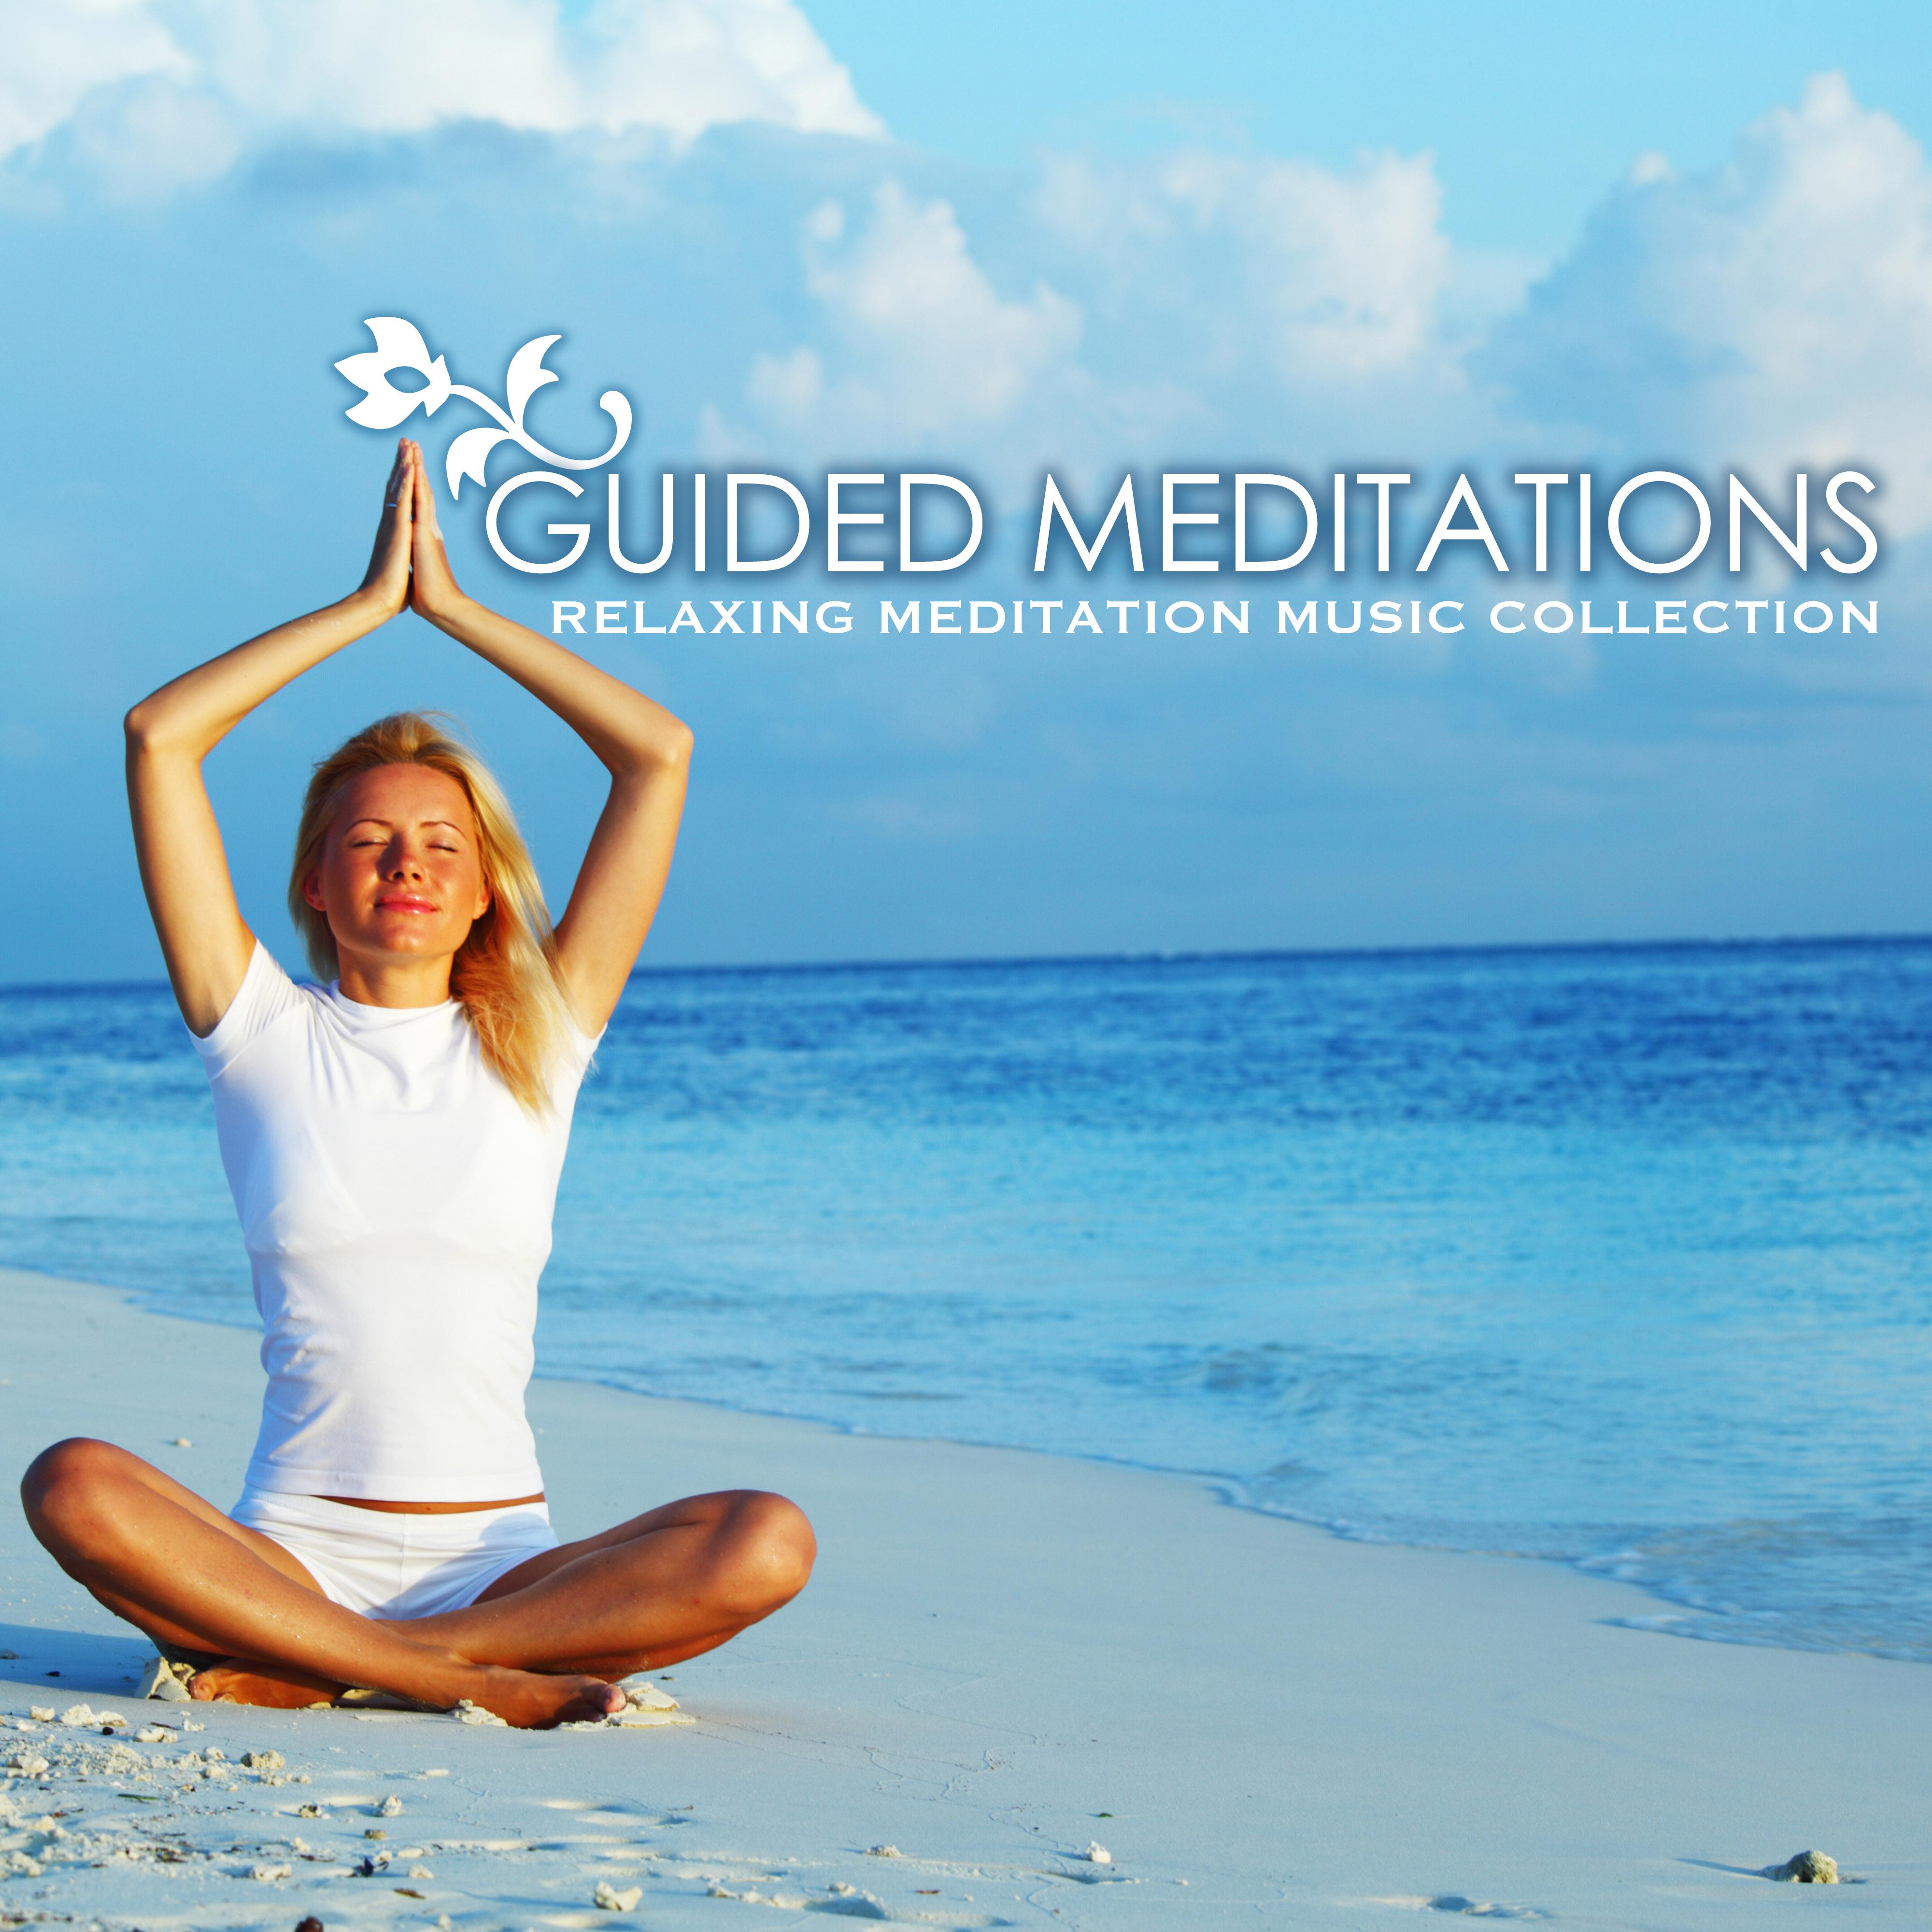 Guided Meditations & Self-Hypnosis - A Relaxing Meditation Music Collection for Stress Relief and Relaxation